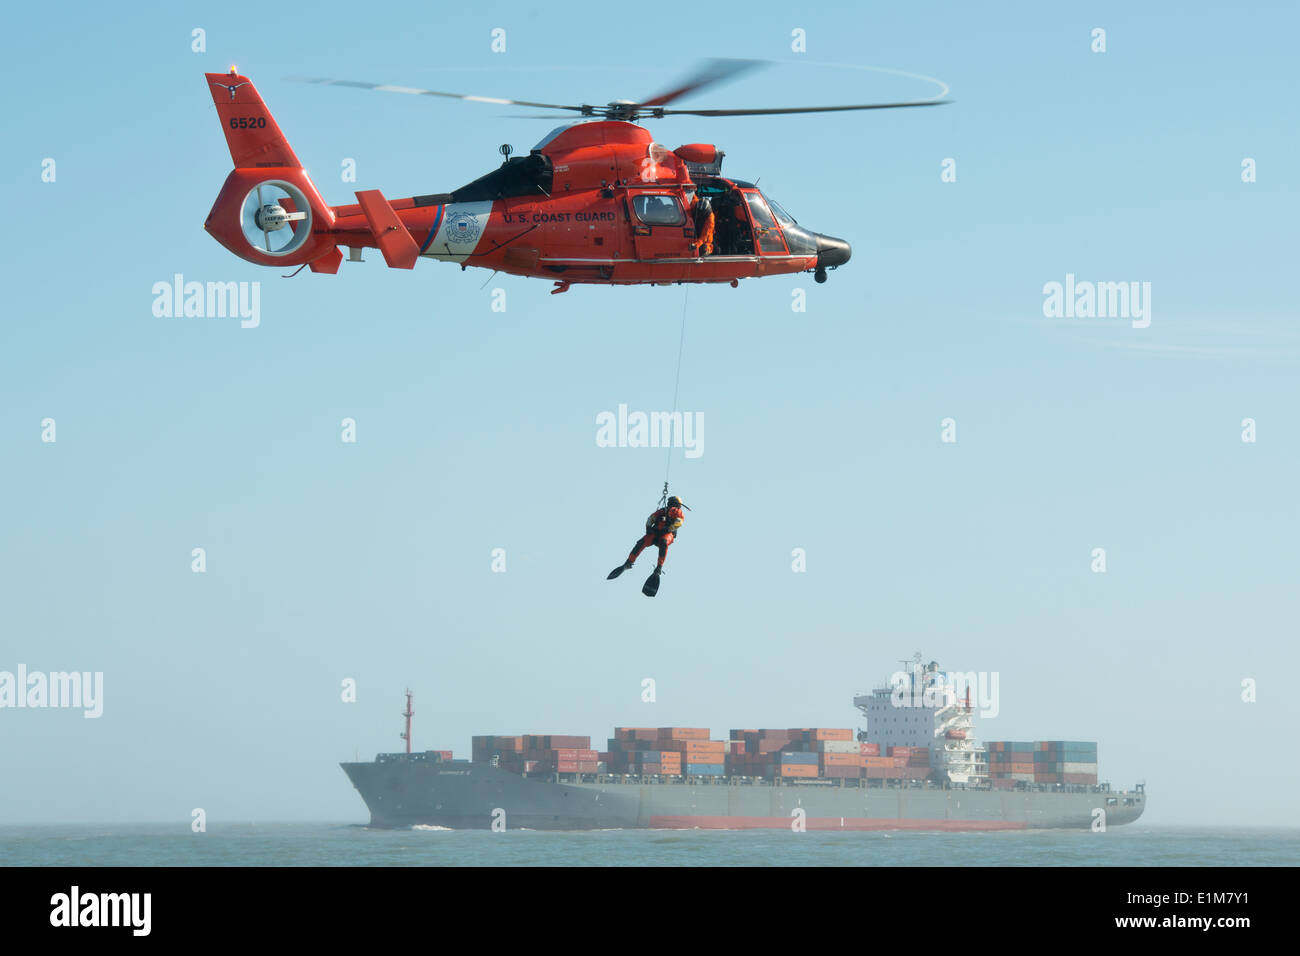 U.S. Coast Guard Petty Officer 3rd Class Andrew Wilson, a rescue swimmer with Air Station Houston, dangles from an HH-65 Dolphi Stock Photo